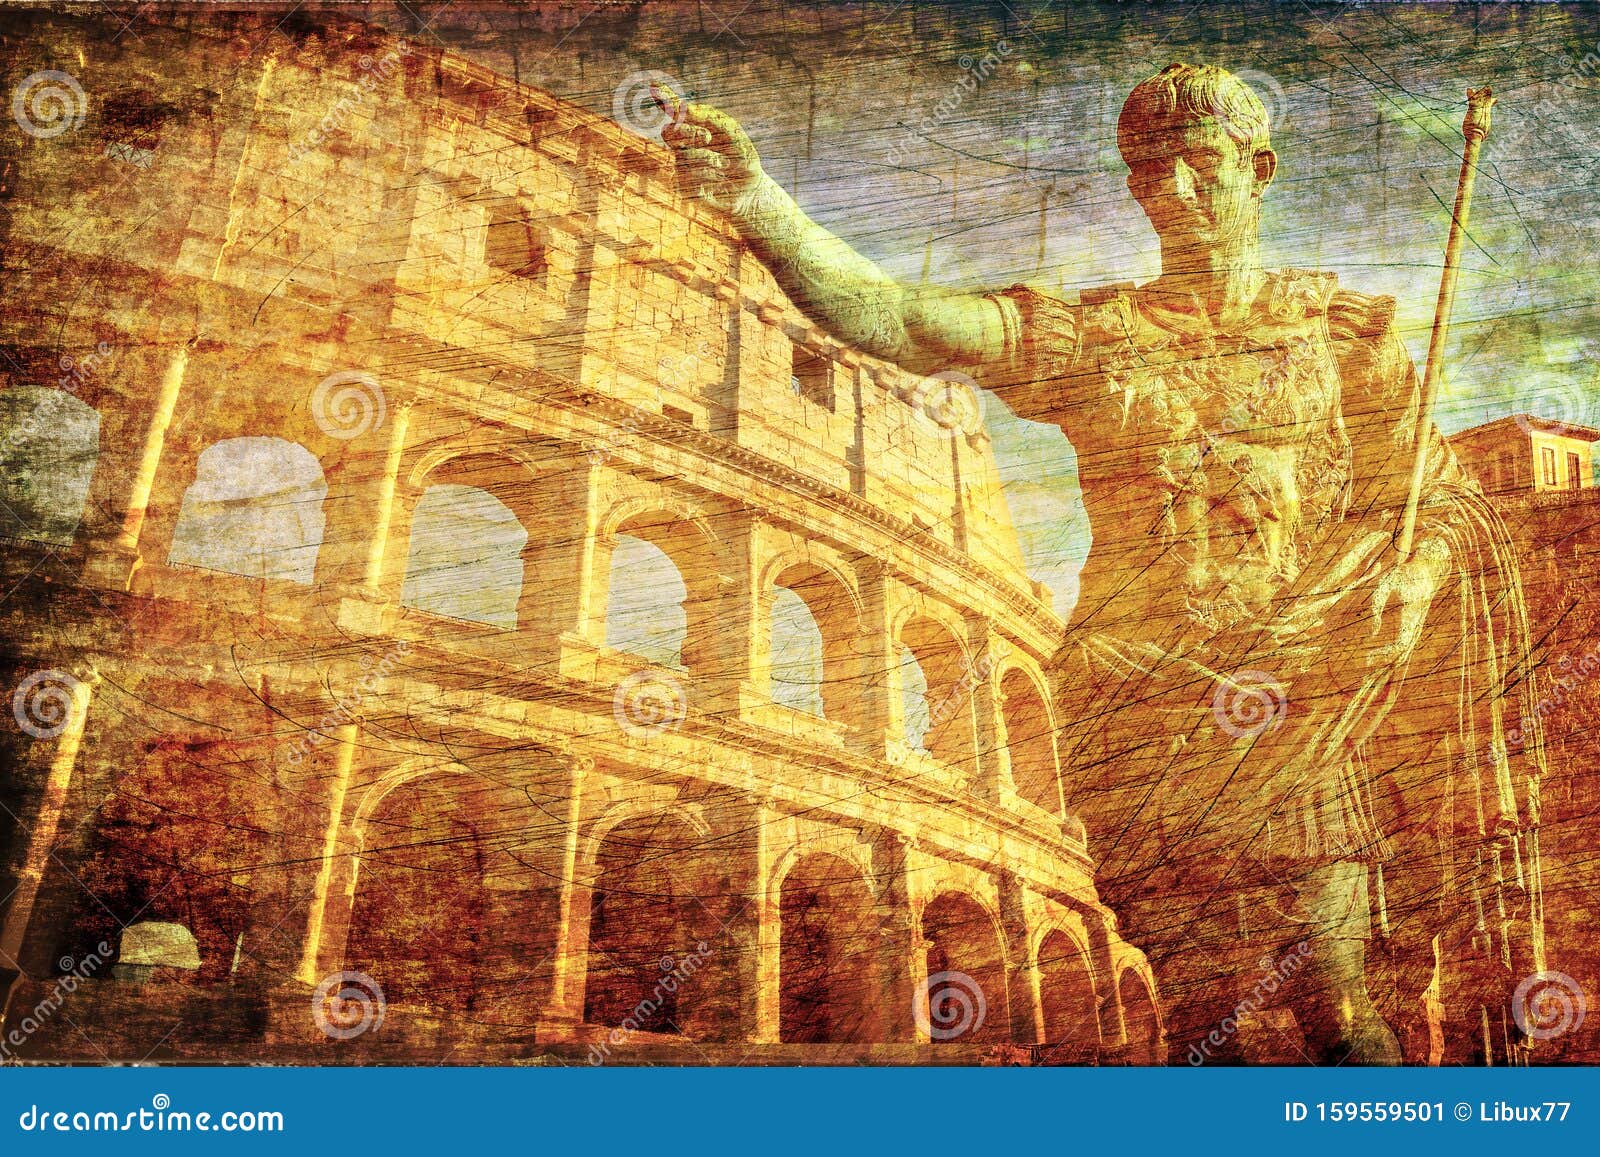 ancient romans signs background with imperator statue conqueror colosseum old europe map